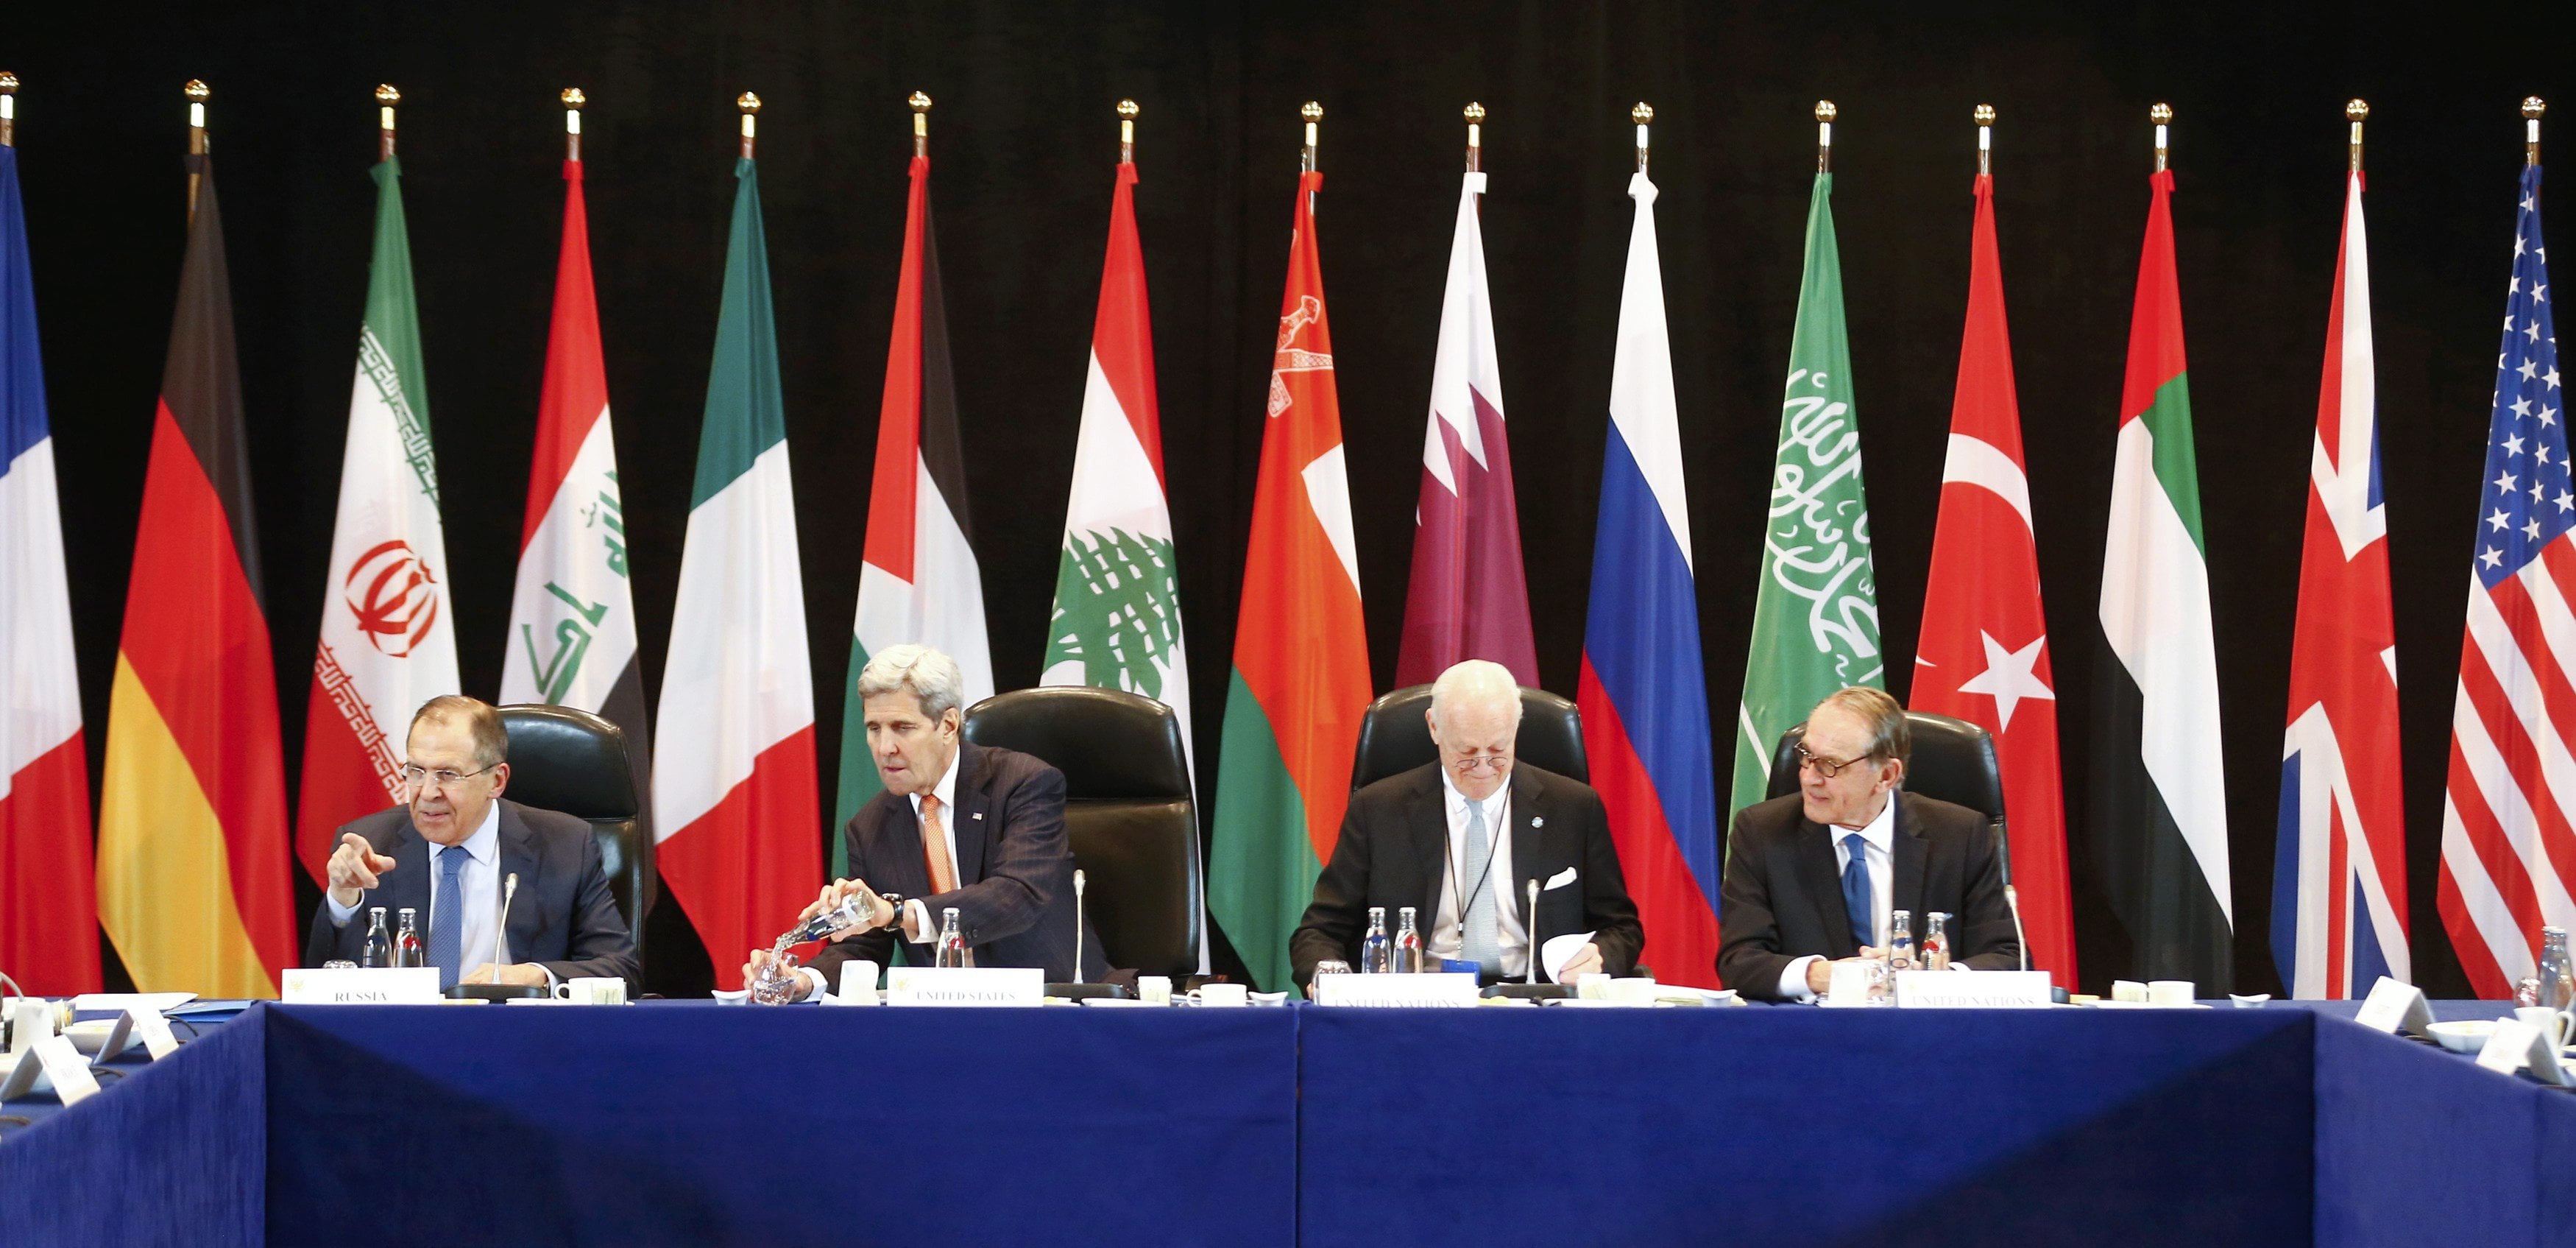 Russian Foreign Minister Sergey Lavrov , left, and U.S. Secretary of State, John Kerry , second left,  attend the International Syria Support Group (ISSG) meeting in Munich, Germany,Thursday Feb. 11, 2016, together with members of the Syrian opposition and other officials.